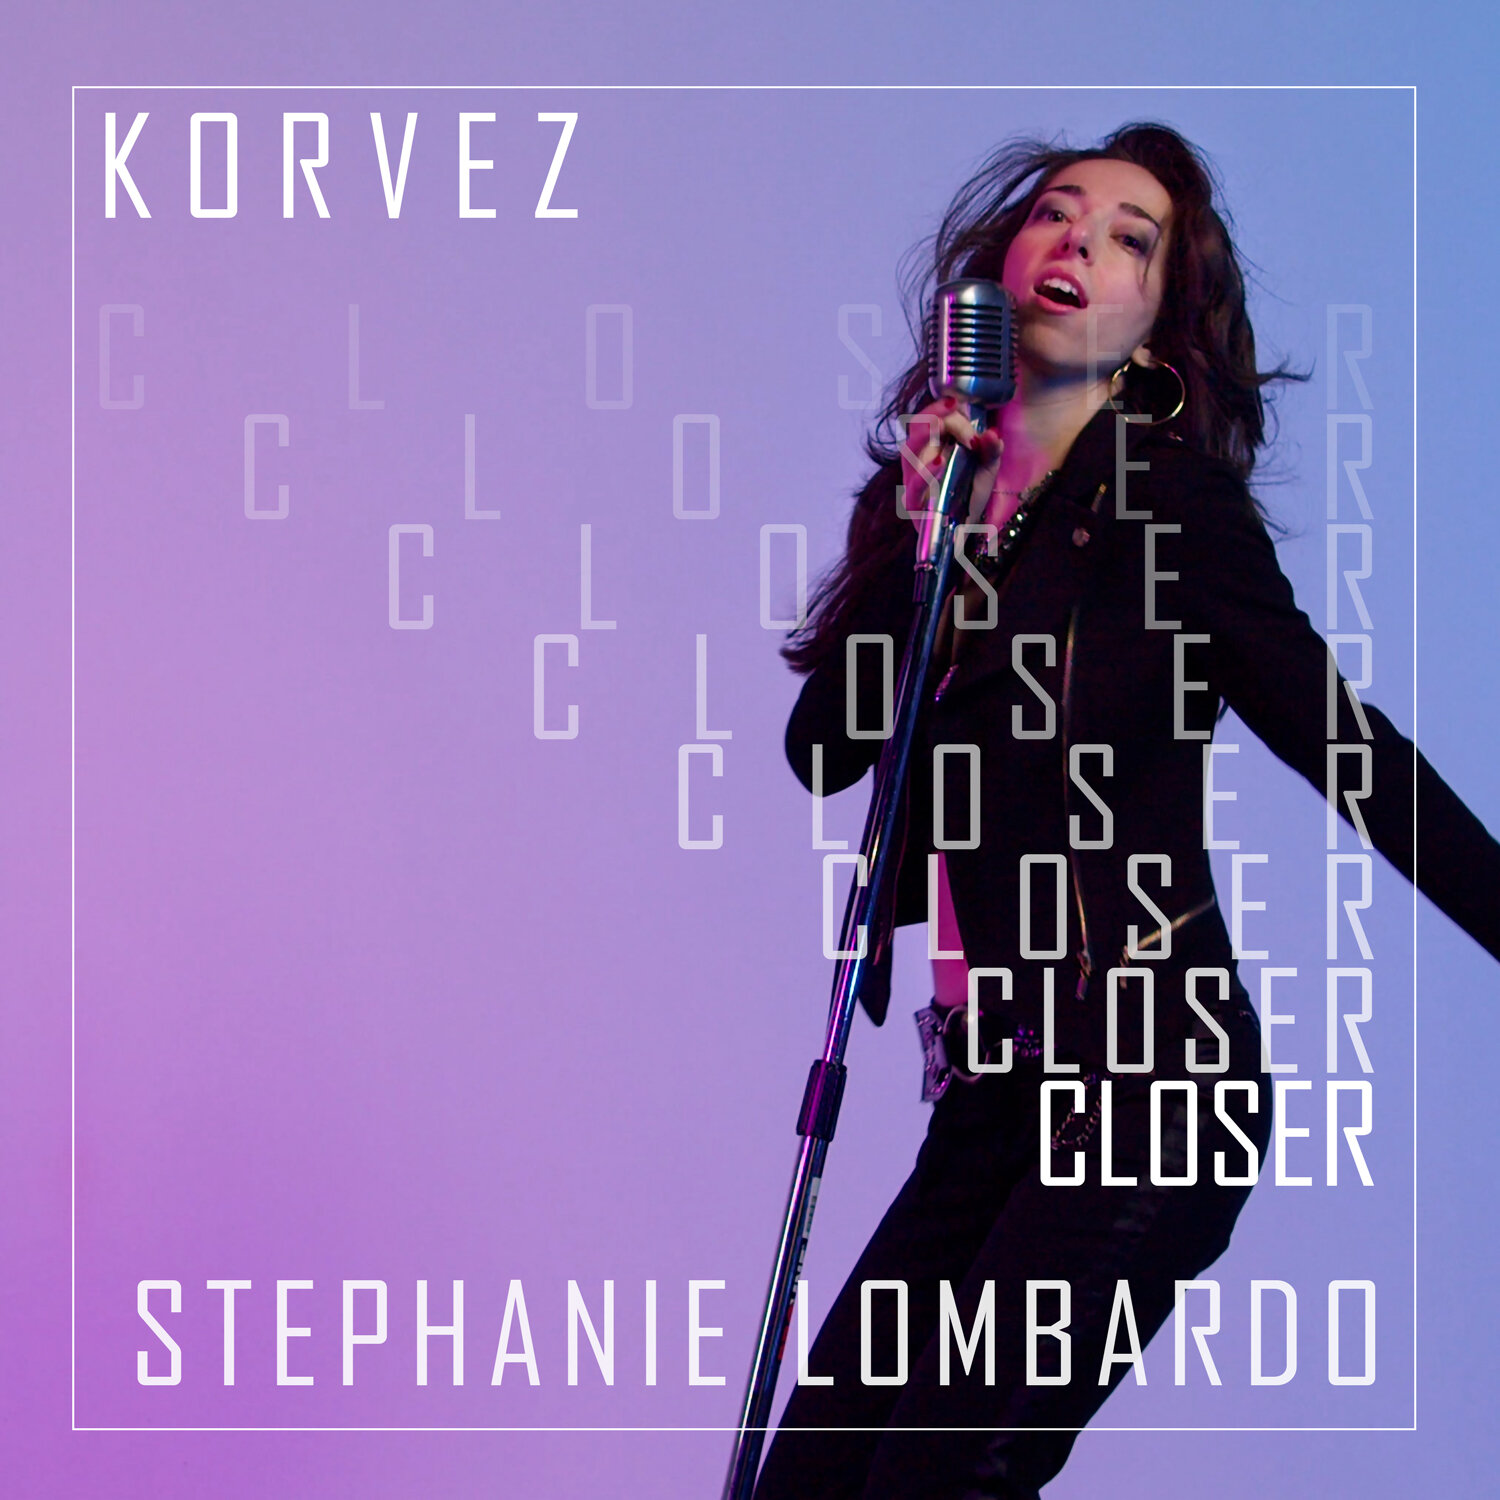 Singer-songwriter Stephanie Lombardo, of East Meadow, recently released her latest song, 'Closer', which she collaborated on with electronic dance music artist Korvez.